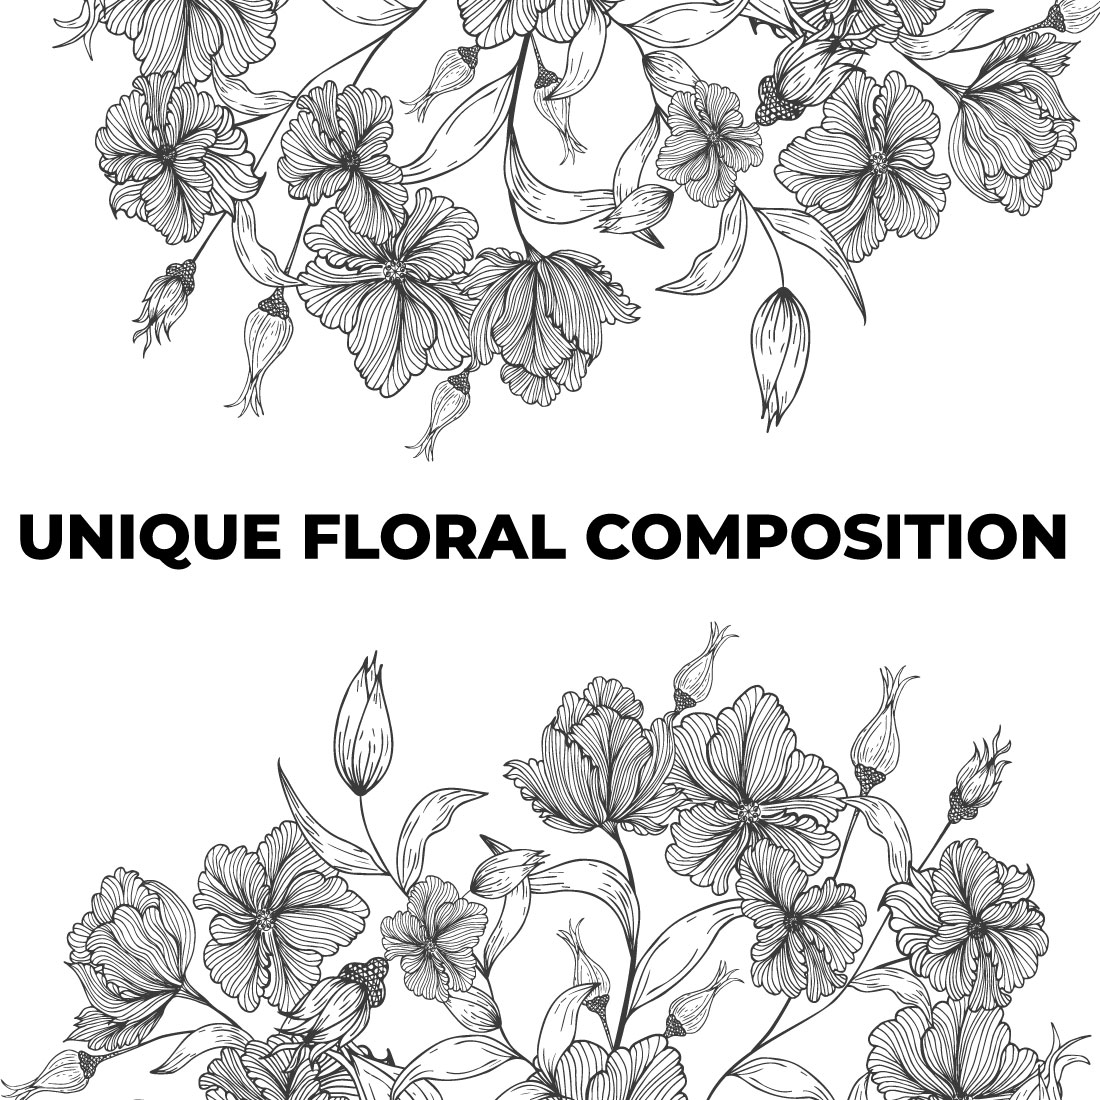 Floral Arrangement in the Style of Line Art cover image.